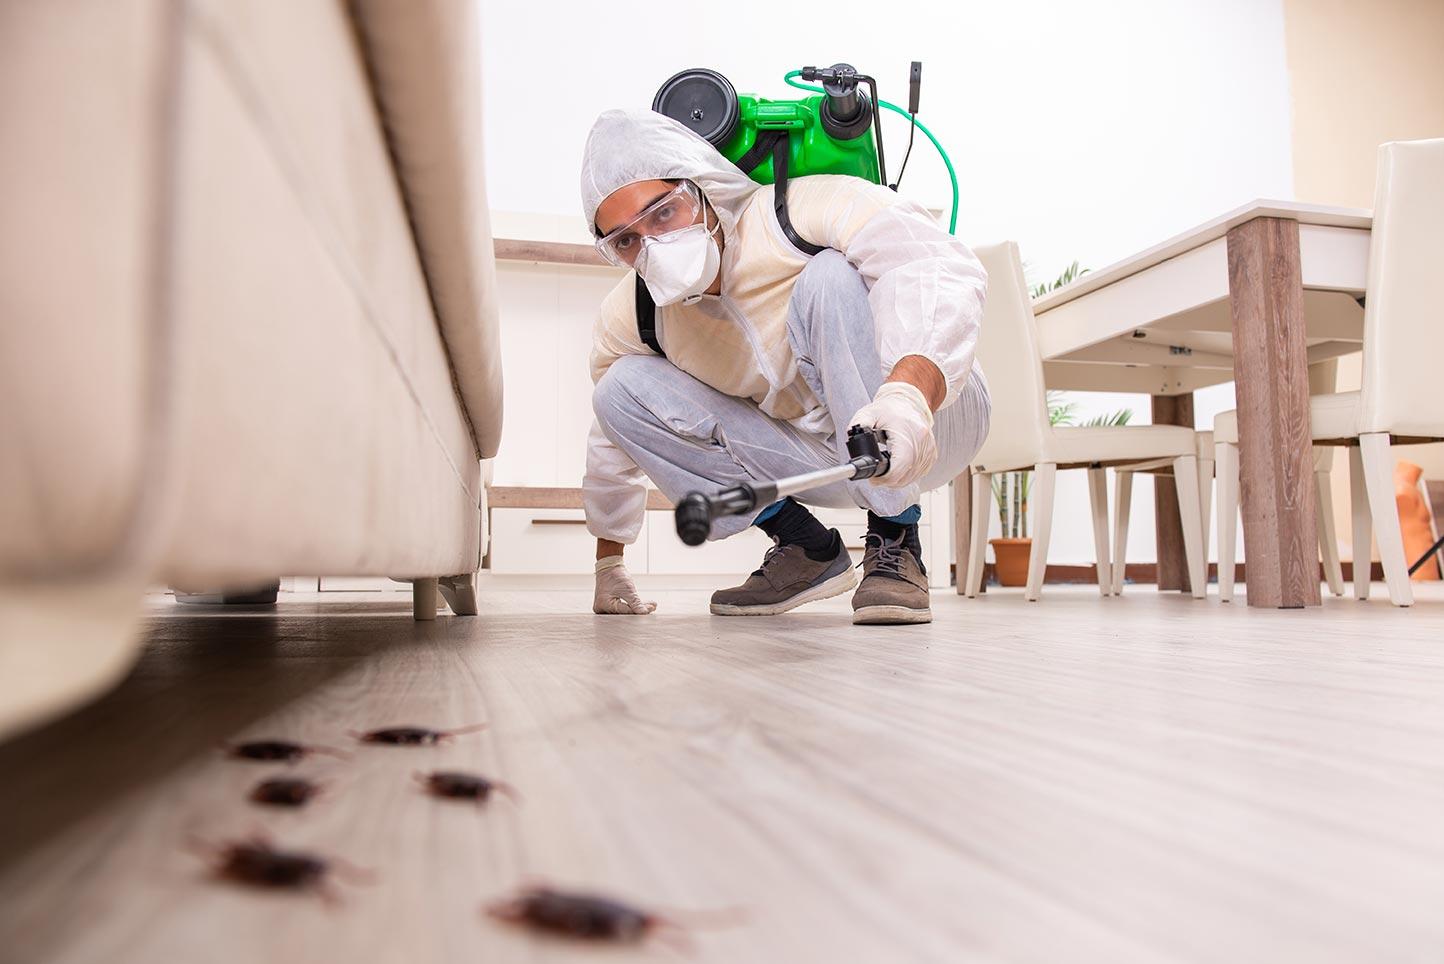 We are a local pest control company that can help with termite control, rodent control, and more